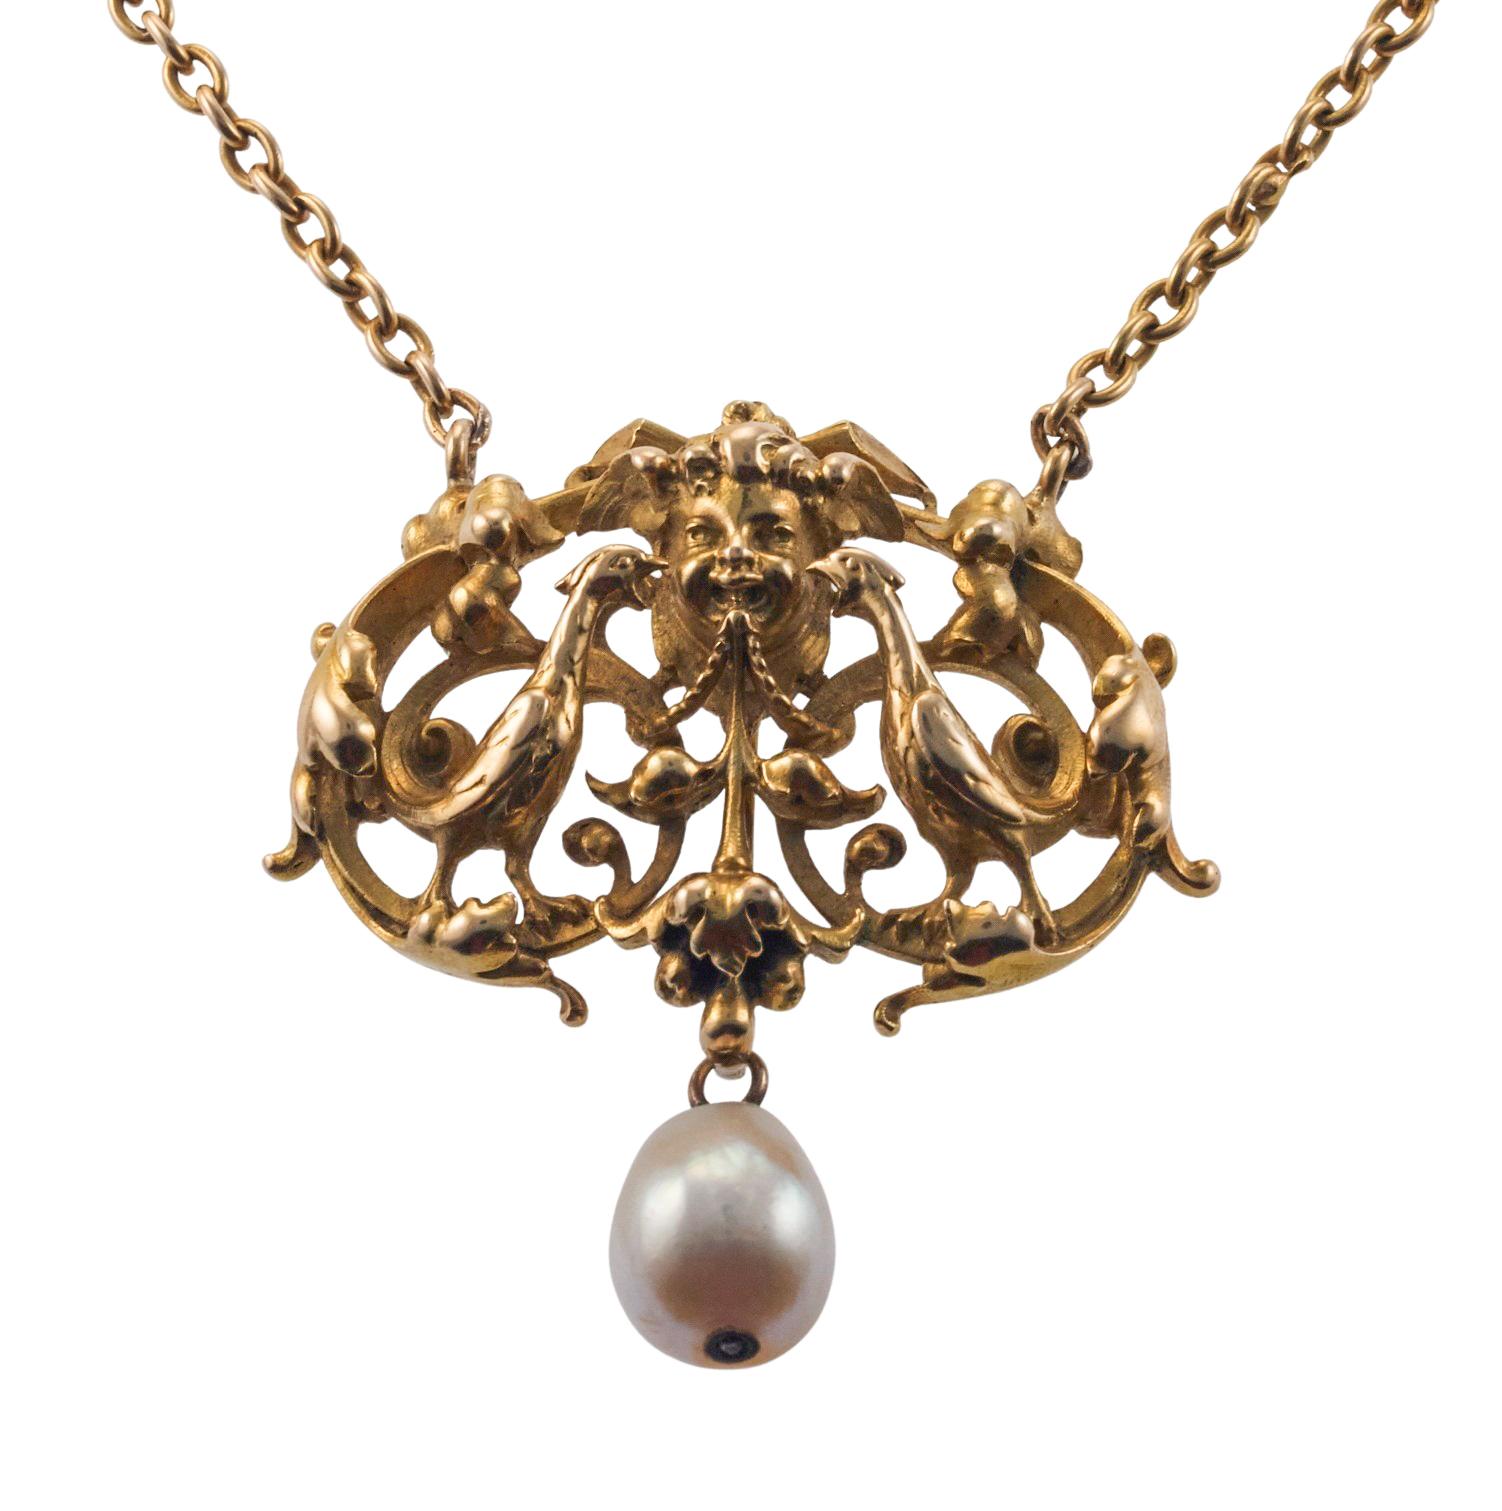 Wiese French Art Nouveau Gold Pearl Pendant Necklace In Excellent Condition For Sale In New York, NY